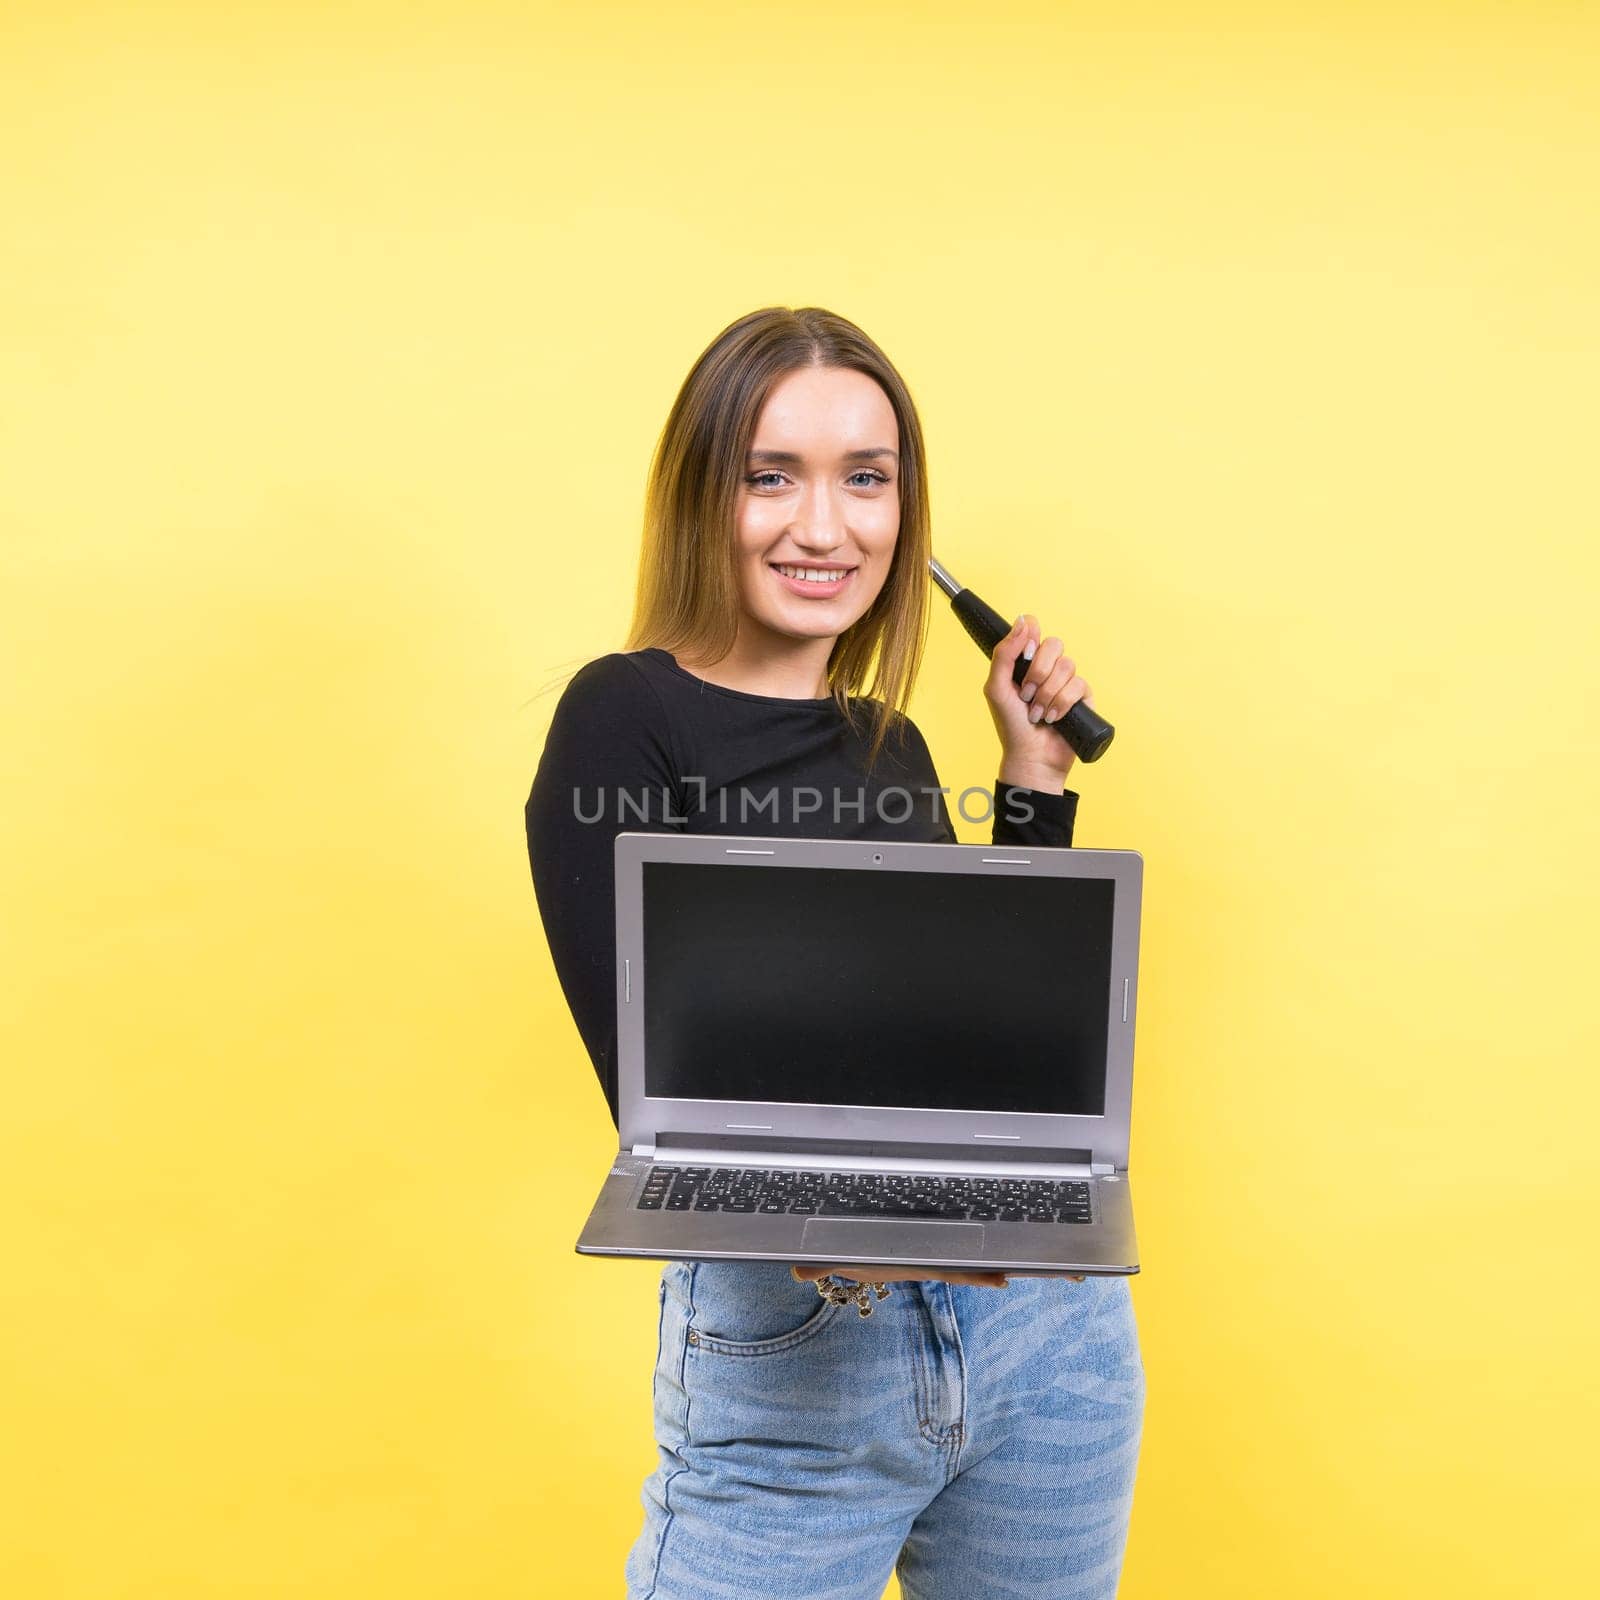 Laptop Repair. Female with hammer and laptop on yellow background by Zelenin